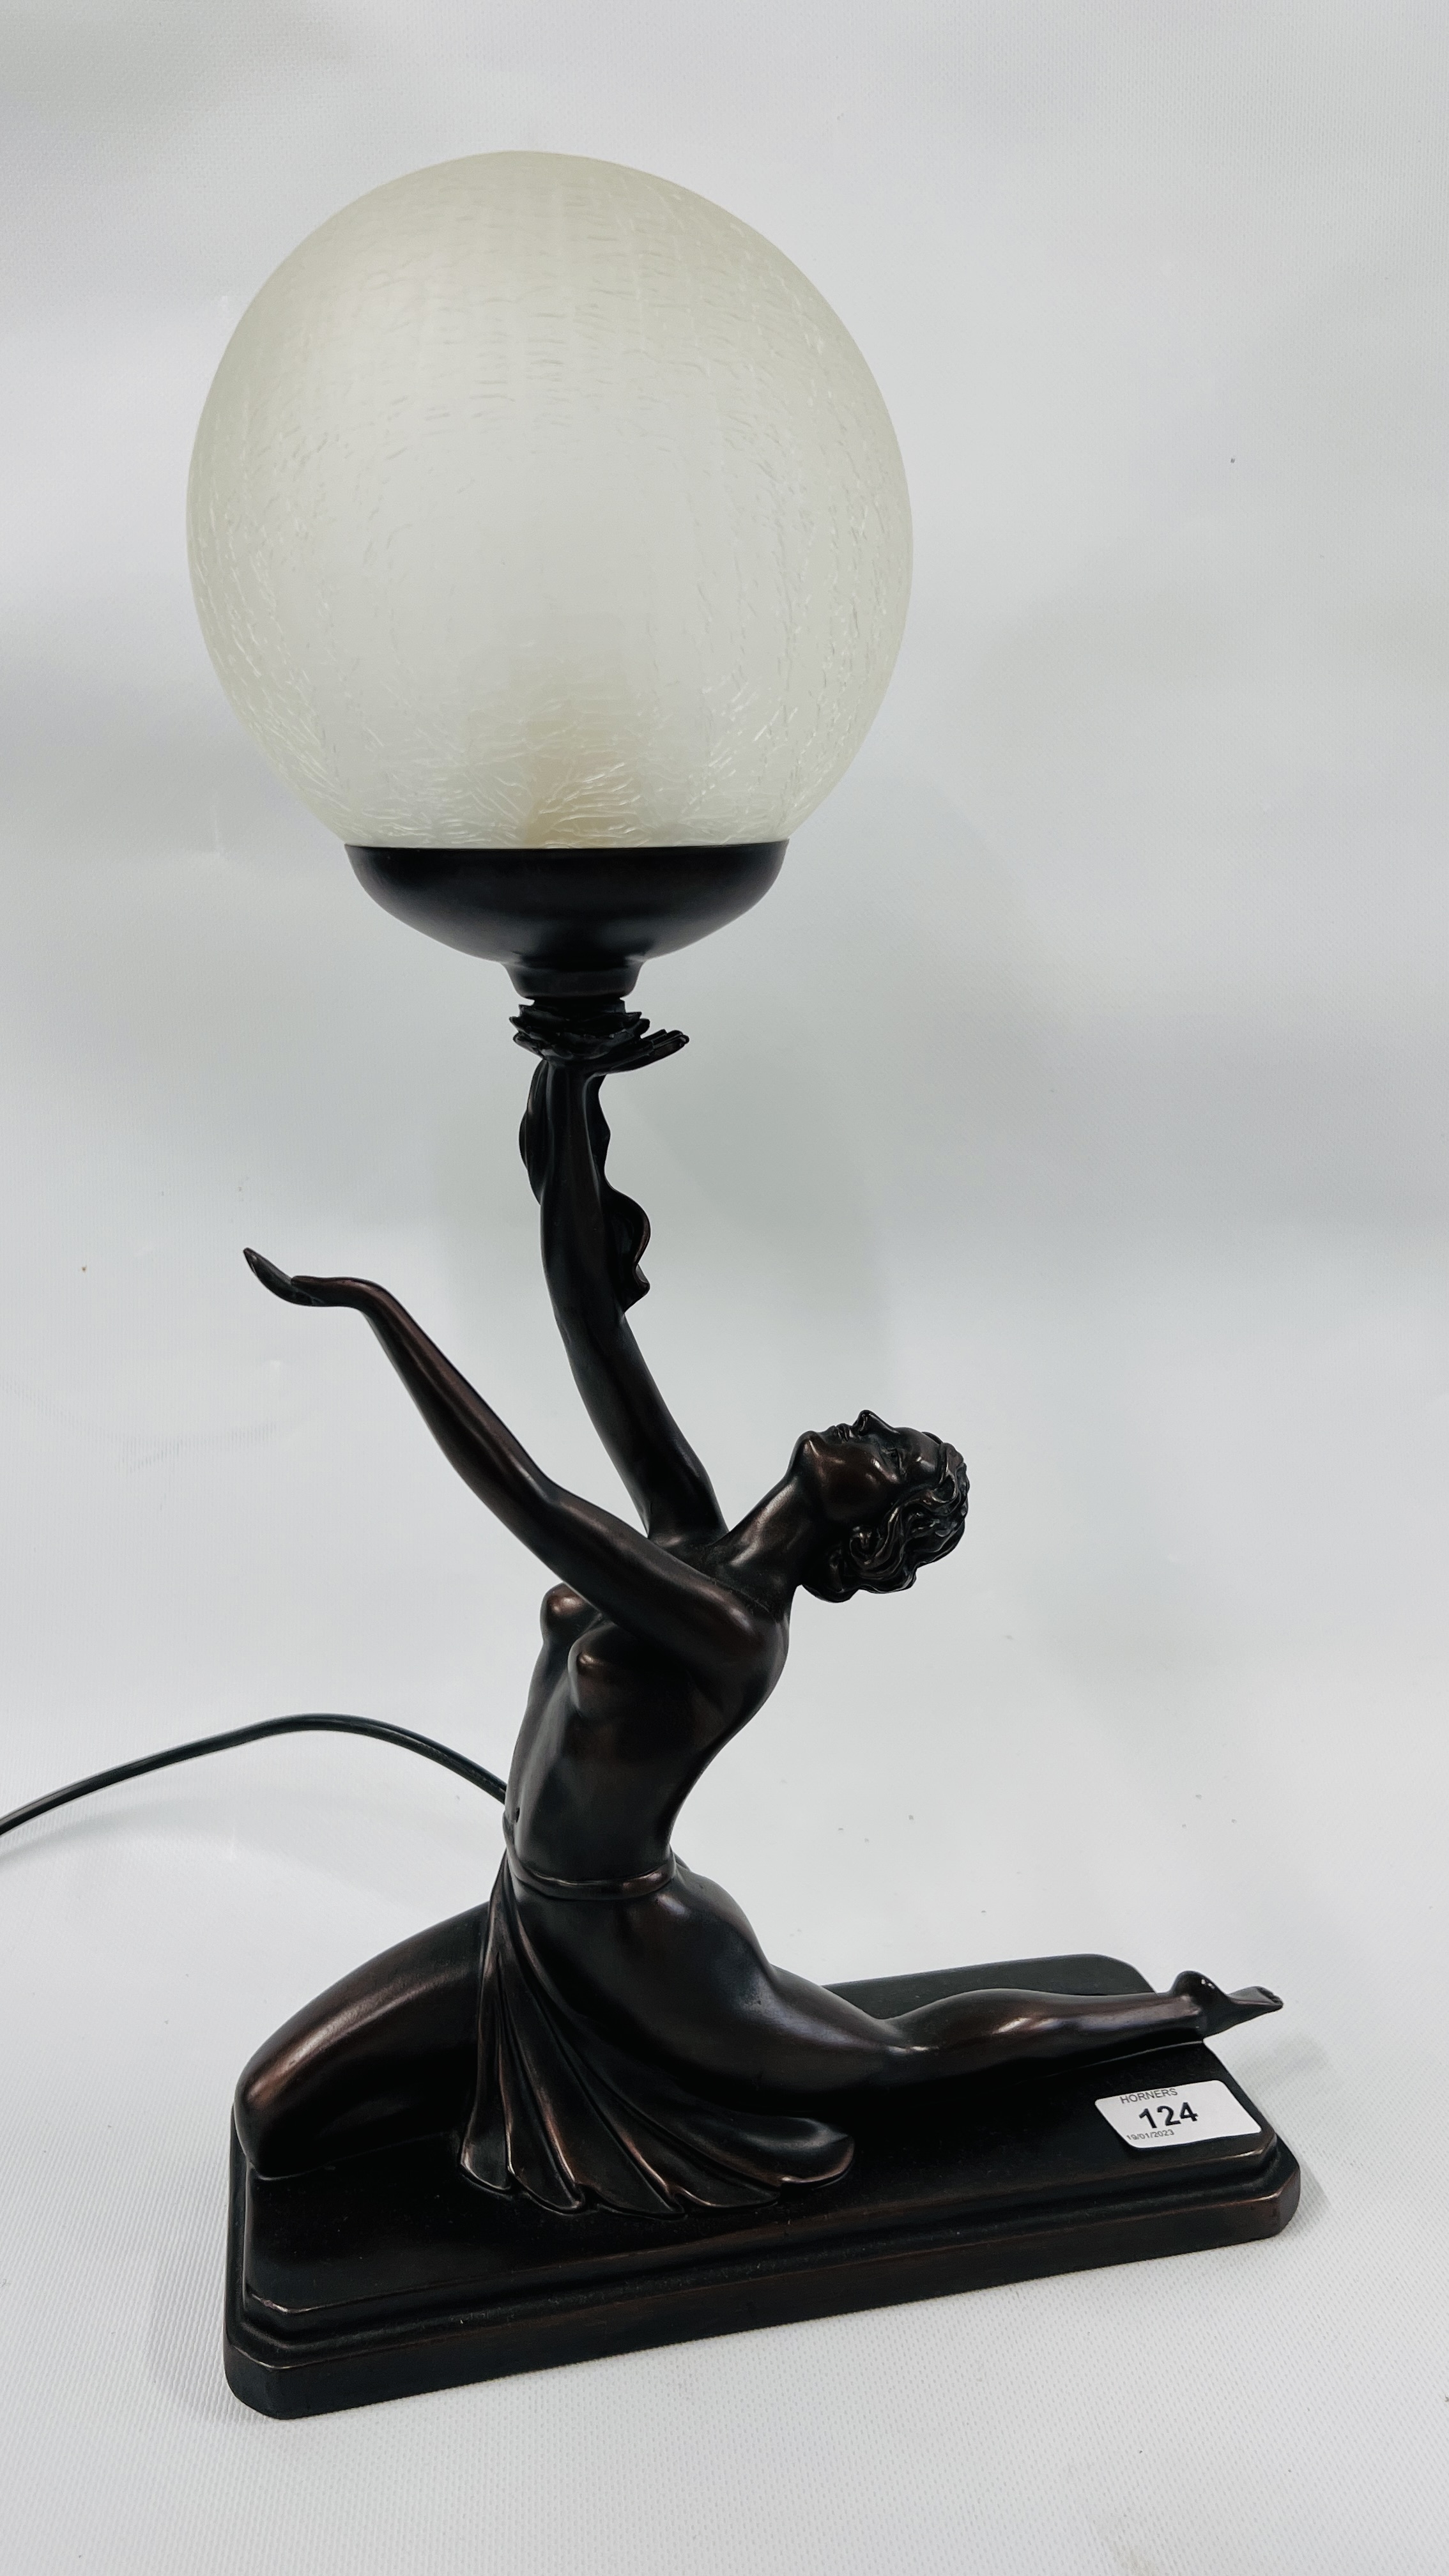 AN ART DECO STYLE FIGURED NUDE TABLE LAMP WITH CRACKLE GLAZED SHADE BY CROSA 1998 HEIGHT 48CM -